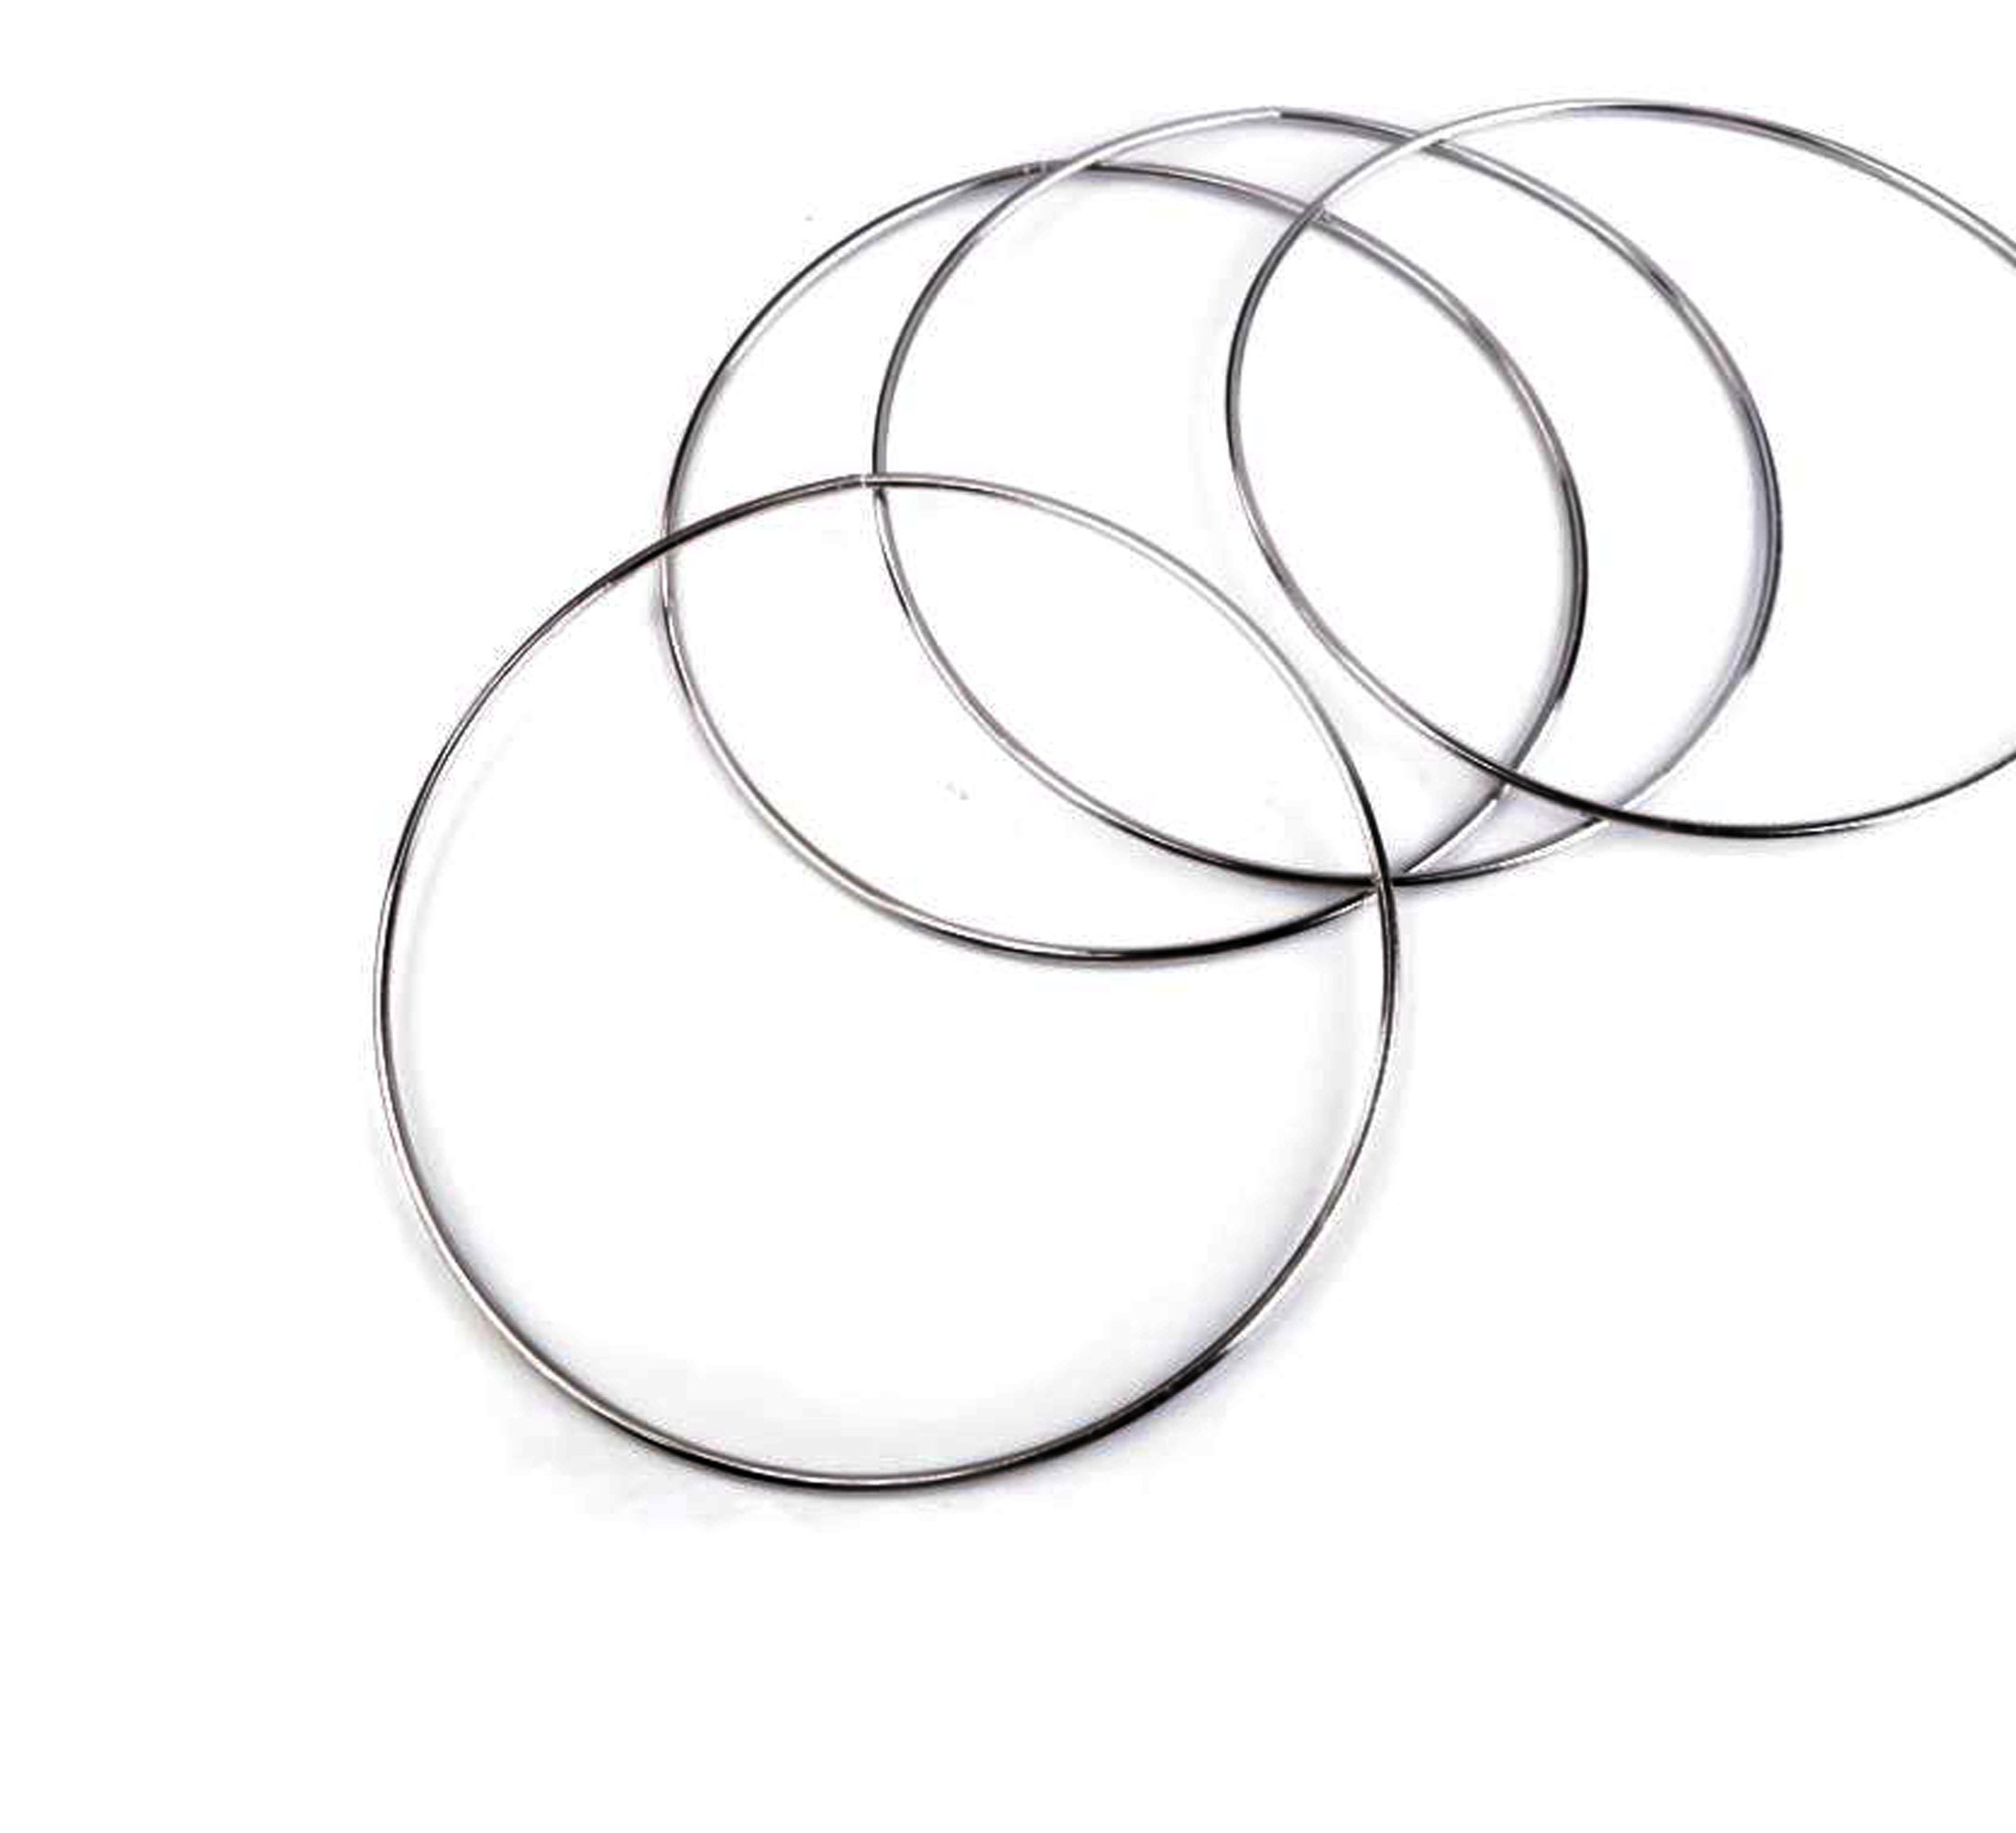 KALIONE 10 Pcs 5 Inch Metal Rings for Craft Silver Hoops Floral Macrame  Hoops Rings for DIY Crafts Macrame Dream Catcher Supplies(Silver,5 inch)